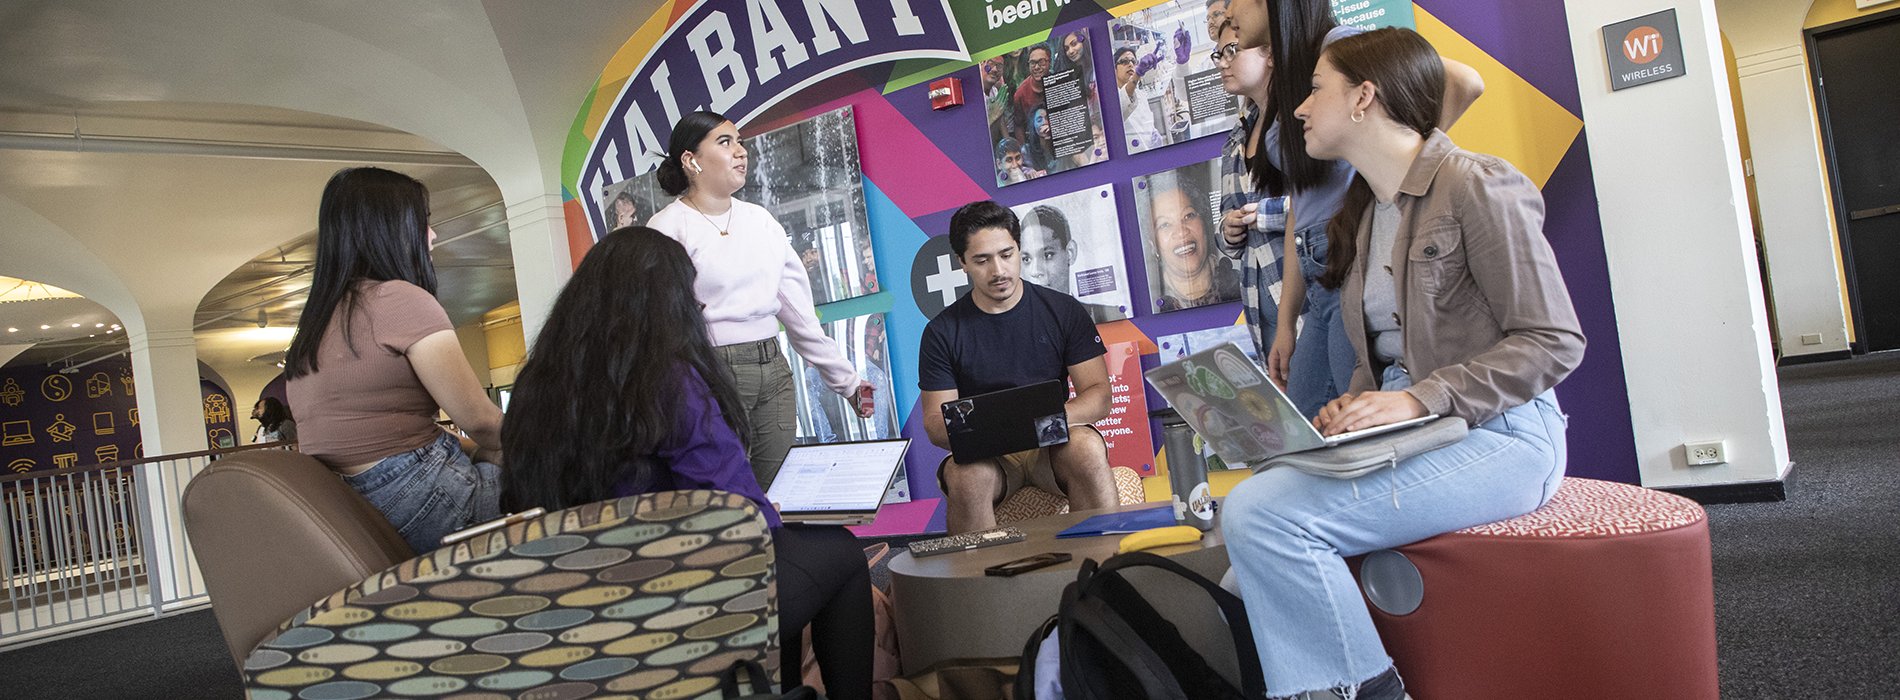 UAlbany students working together in campus center